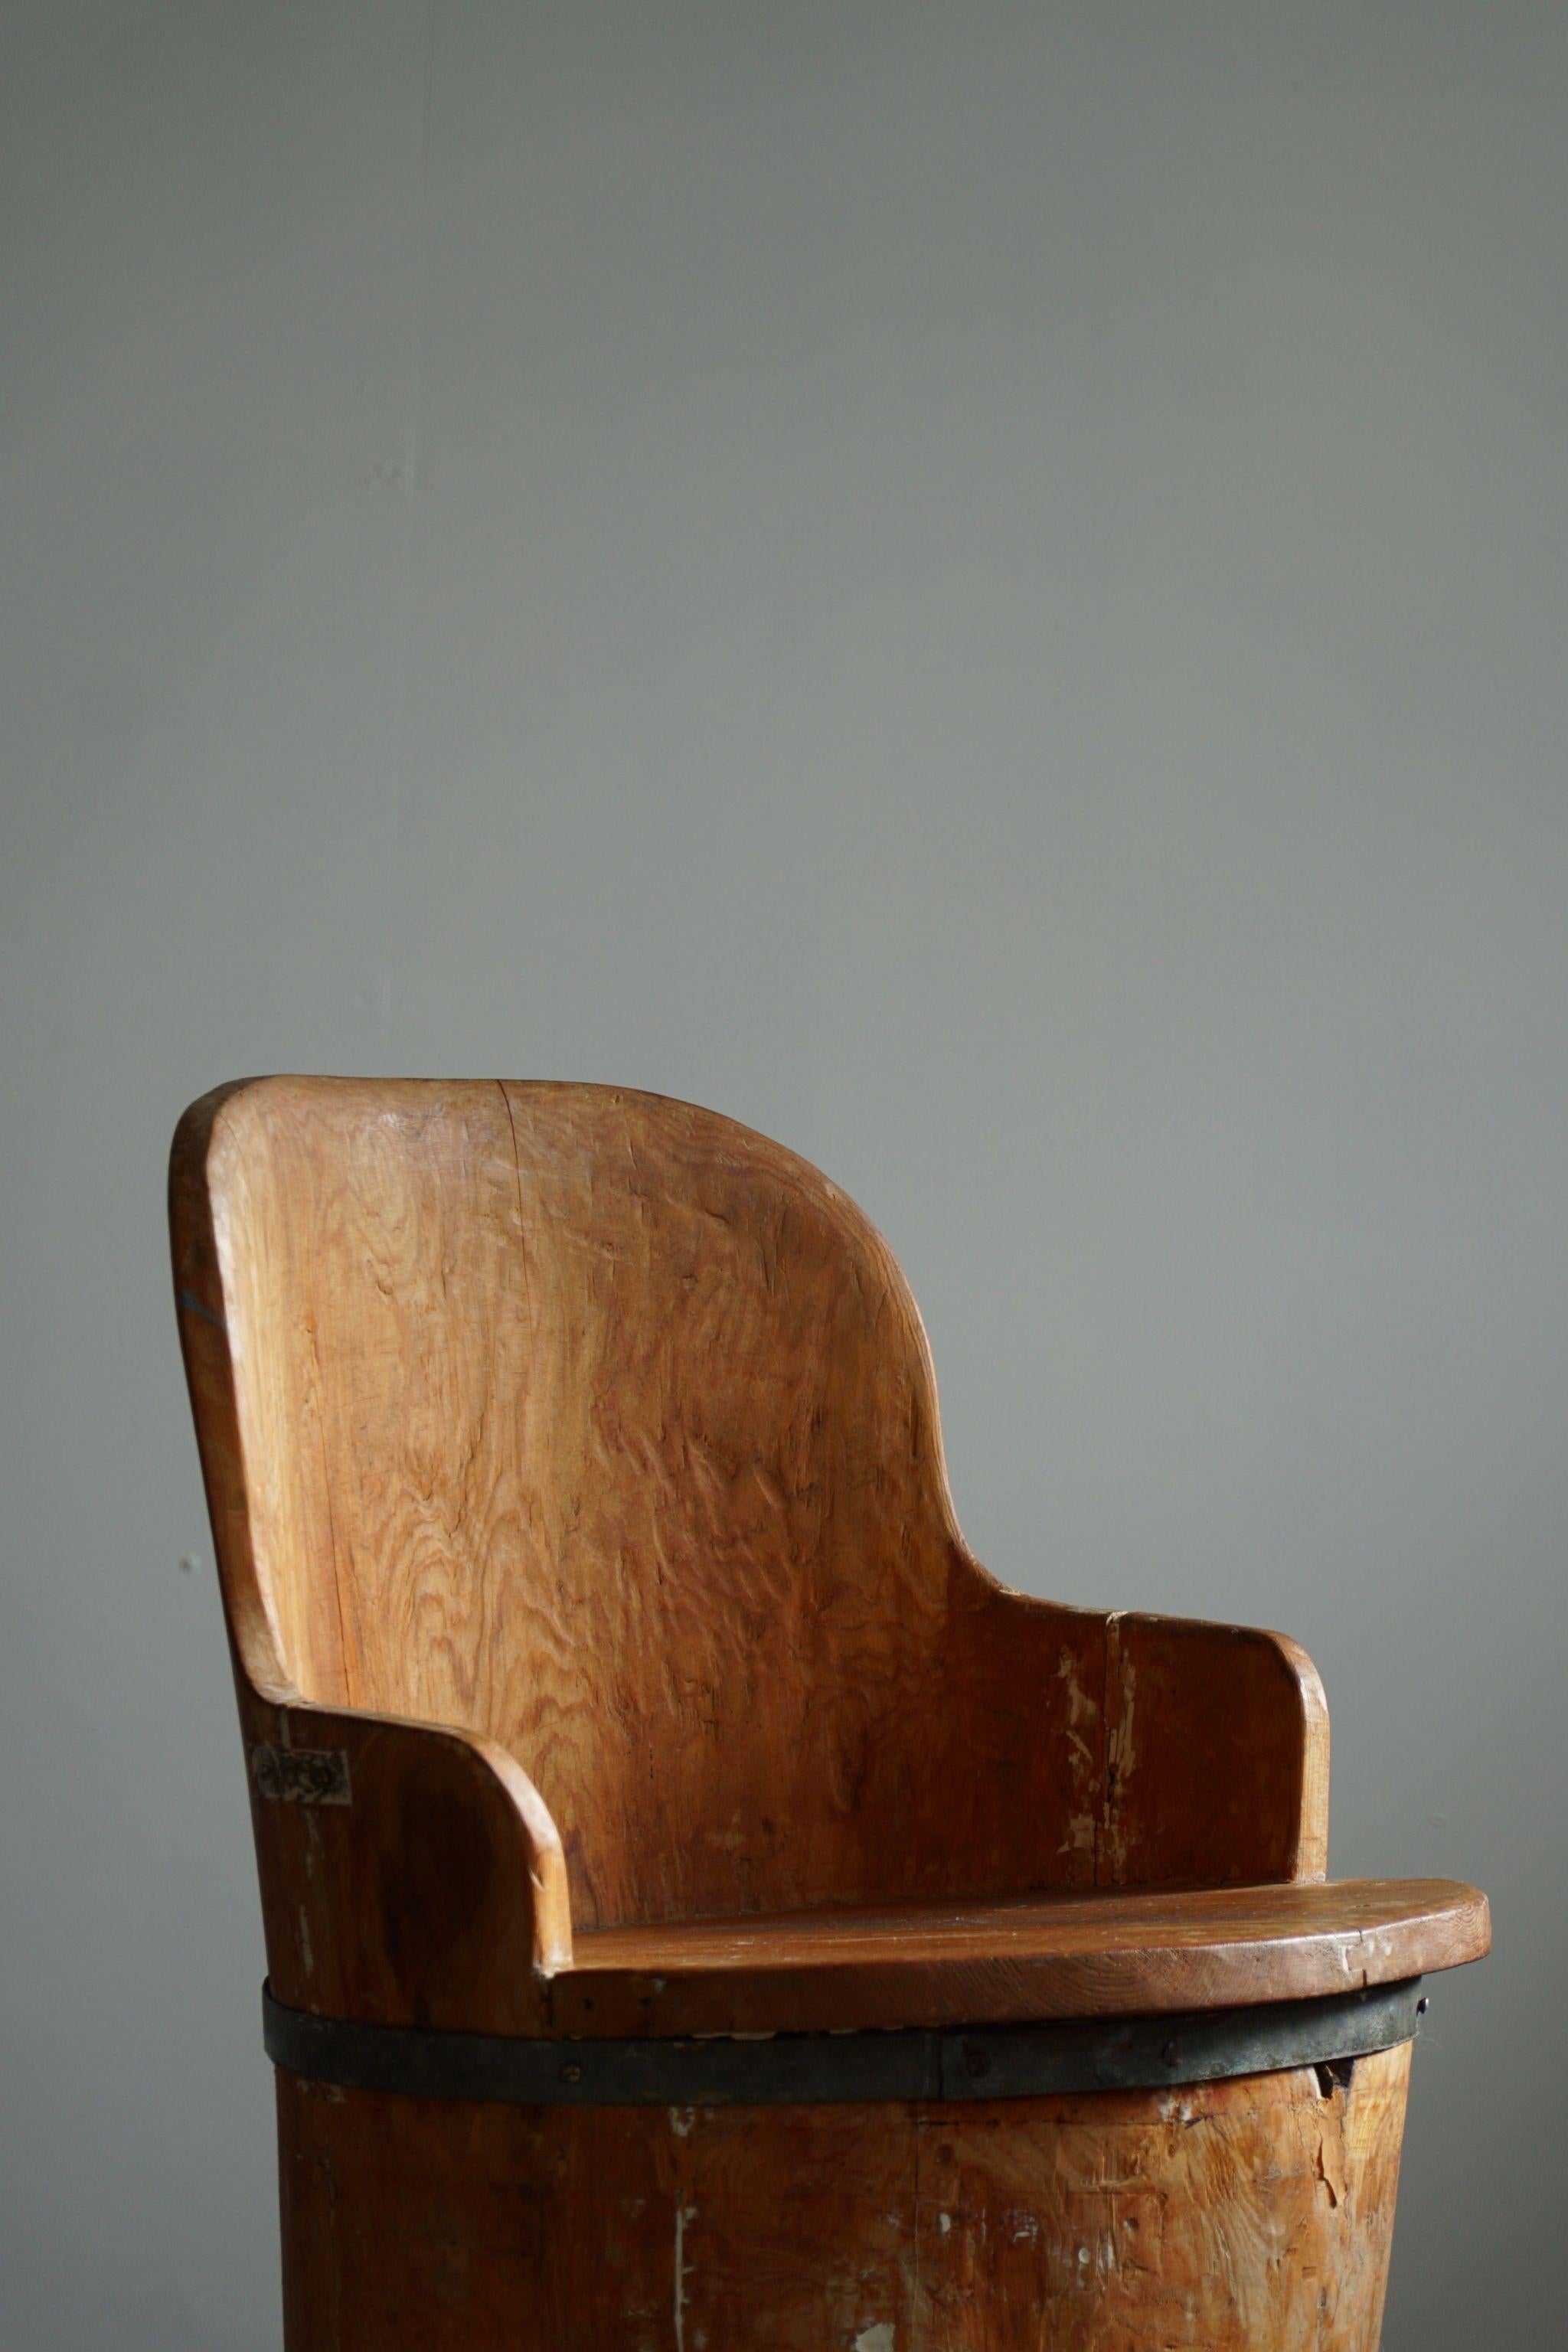 Mid 20th Century Wabi Sabi Stump Chair in Pine, by a Swedish Cabinetmaker, 1950s For Sale 4